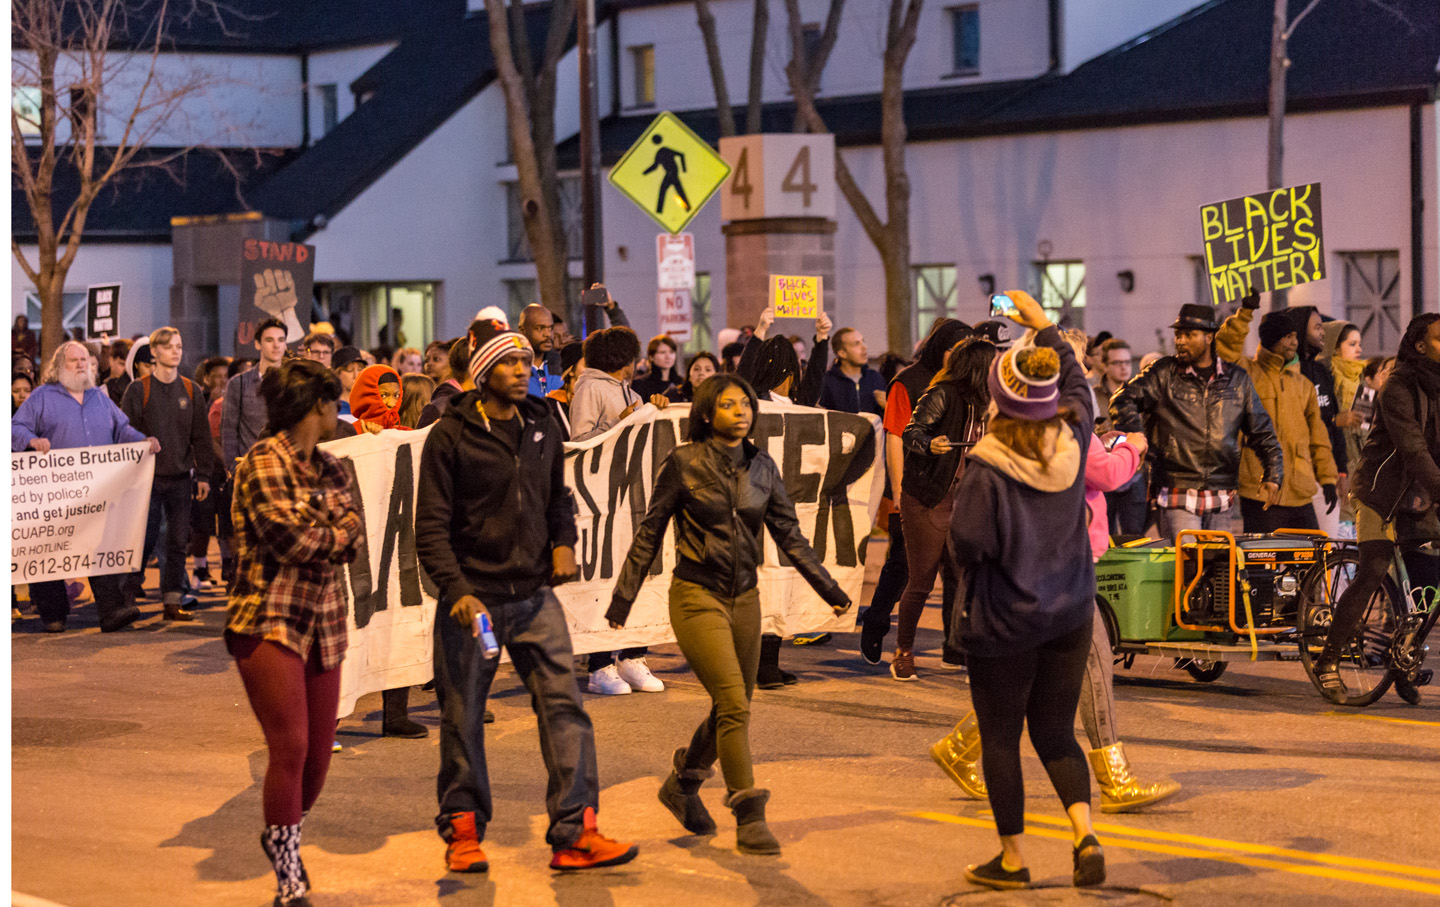 Black Lives Matter activists march along Plymouth Avenue North in front of the 4th Precinct station, toward the Minneapolis Urban League, where Mayor Betsy Hodges and Chief Janee Harteau held a community listening session regarding the officer-involved shooting of Jamar Clark, on November 15, 2015.

Photo: Tony Webster
tony@tonywebster.com